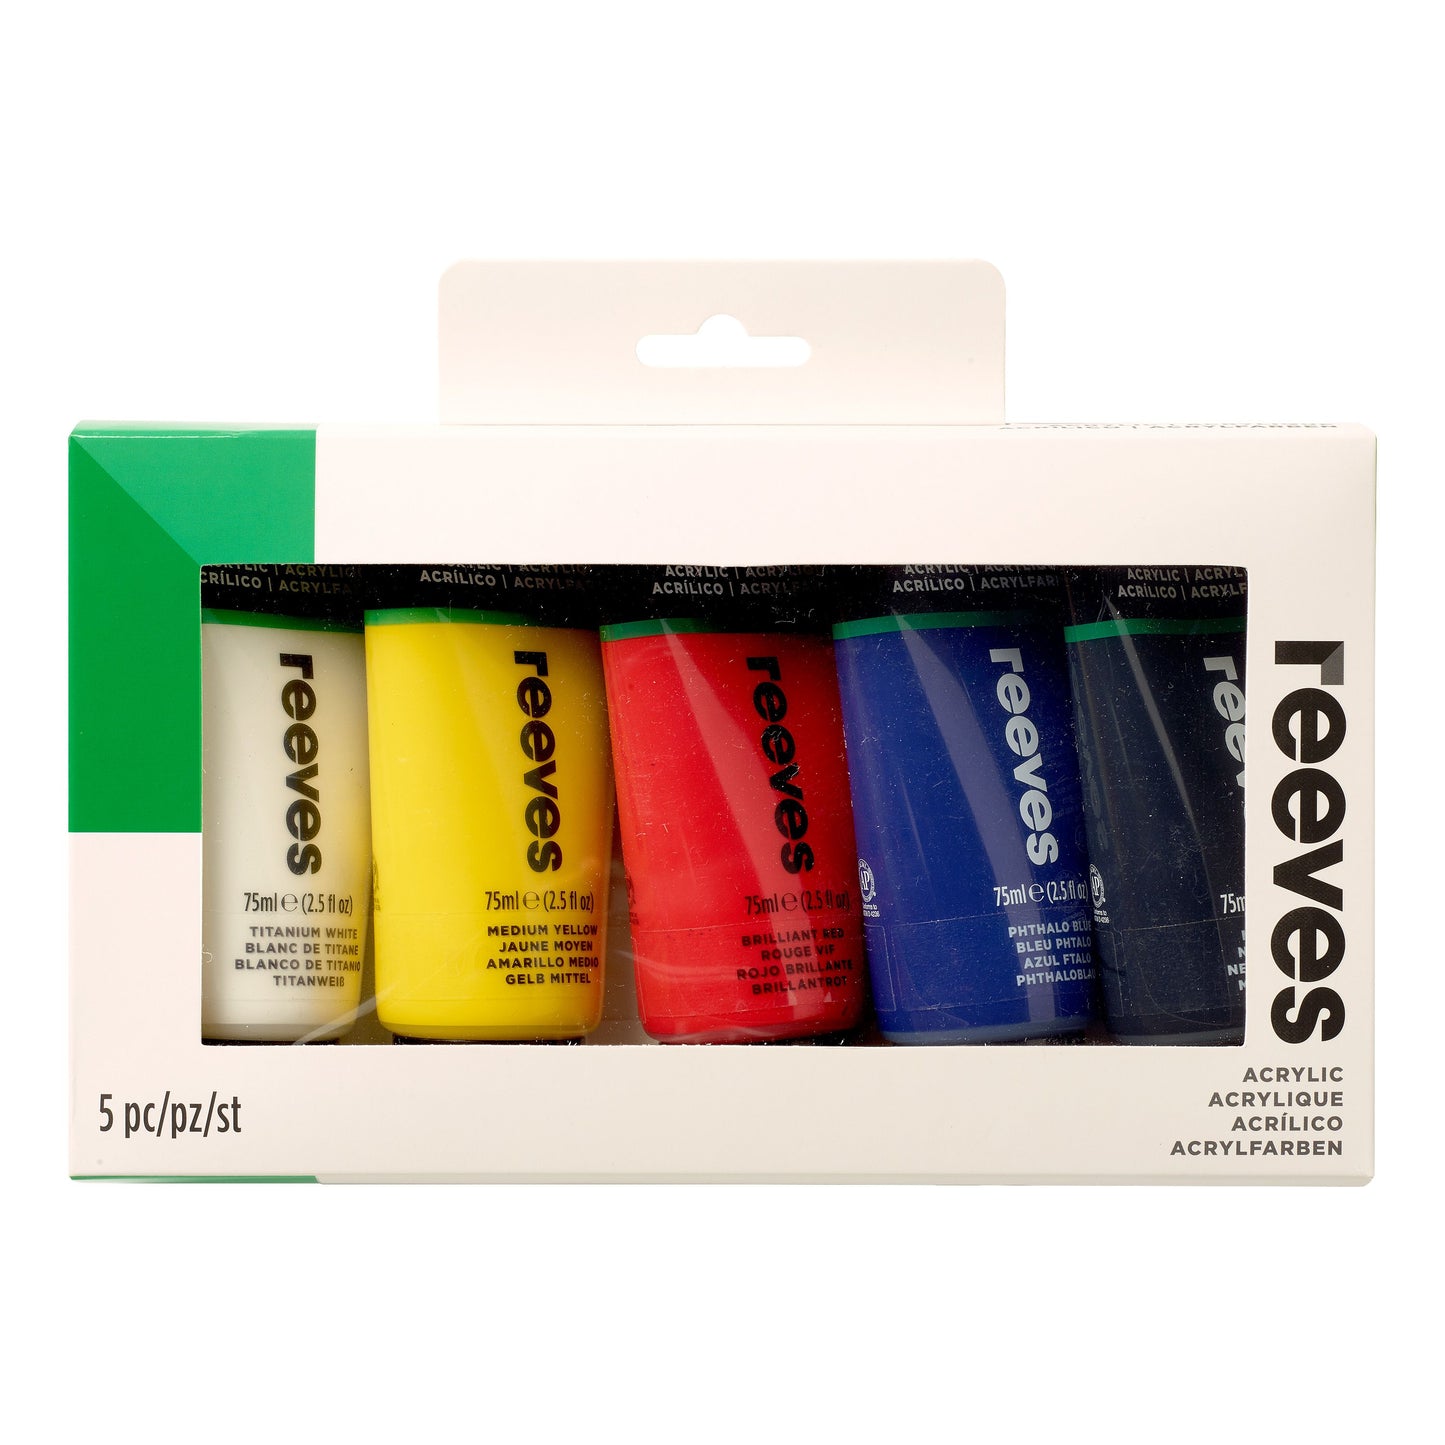 Reeves Acrylic Paint Sets